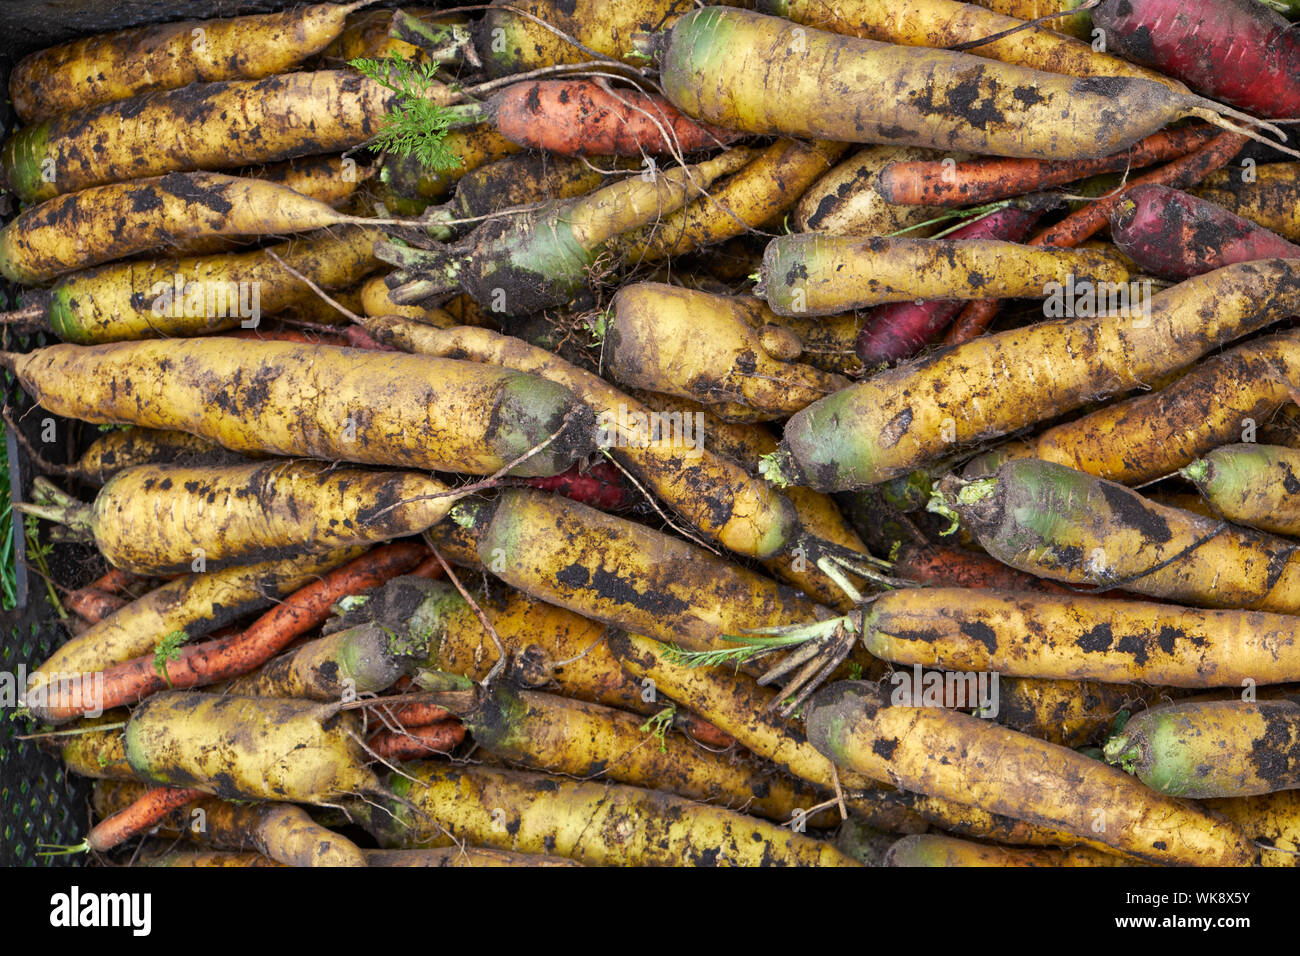 Display of freshly harvested yellow carrots before rinsing Stock Photo